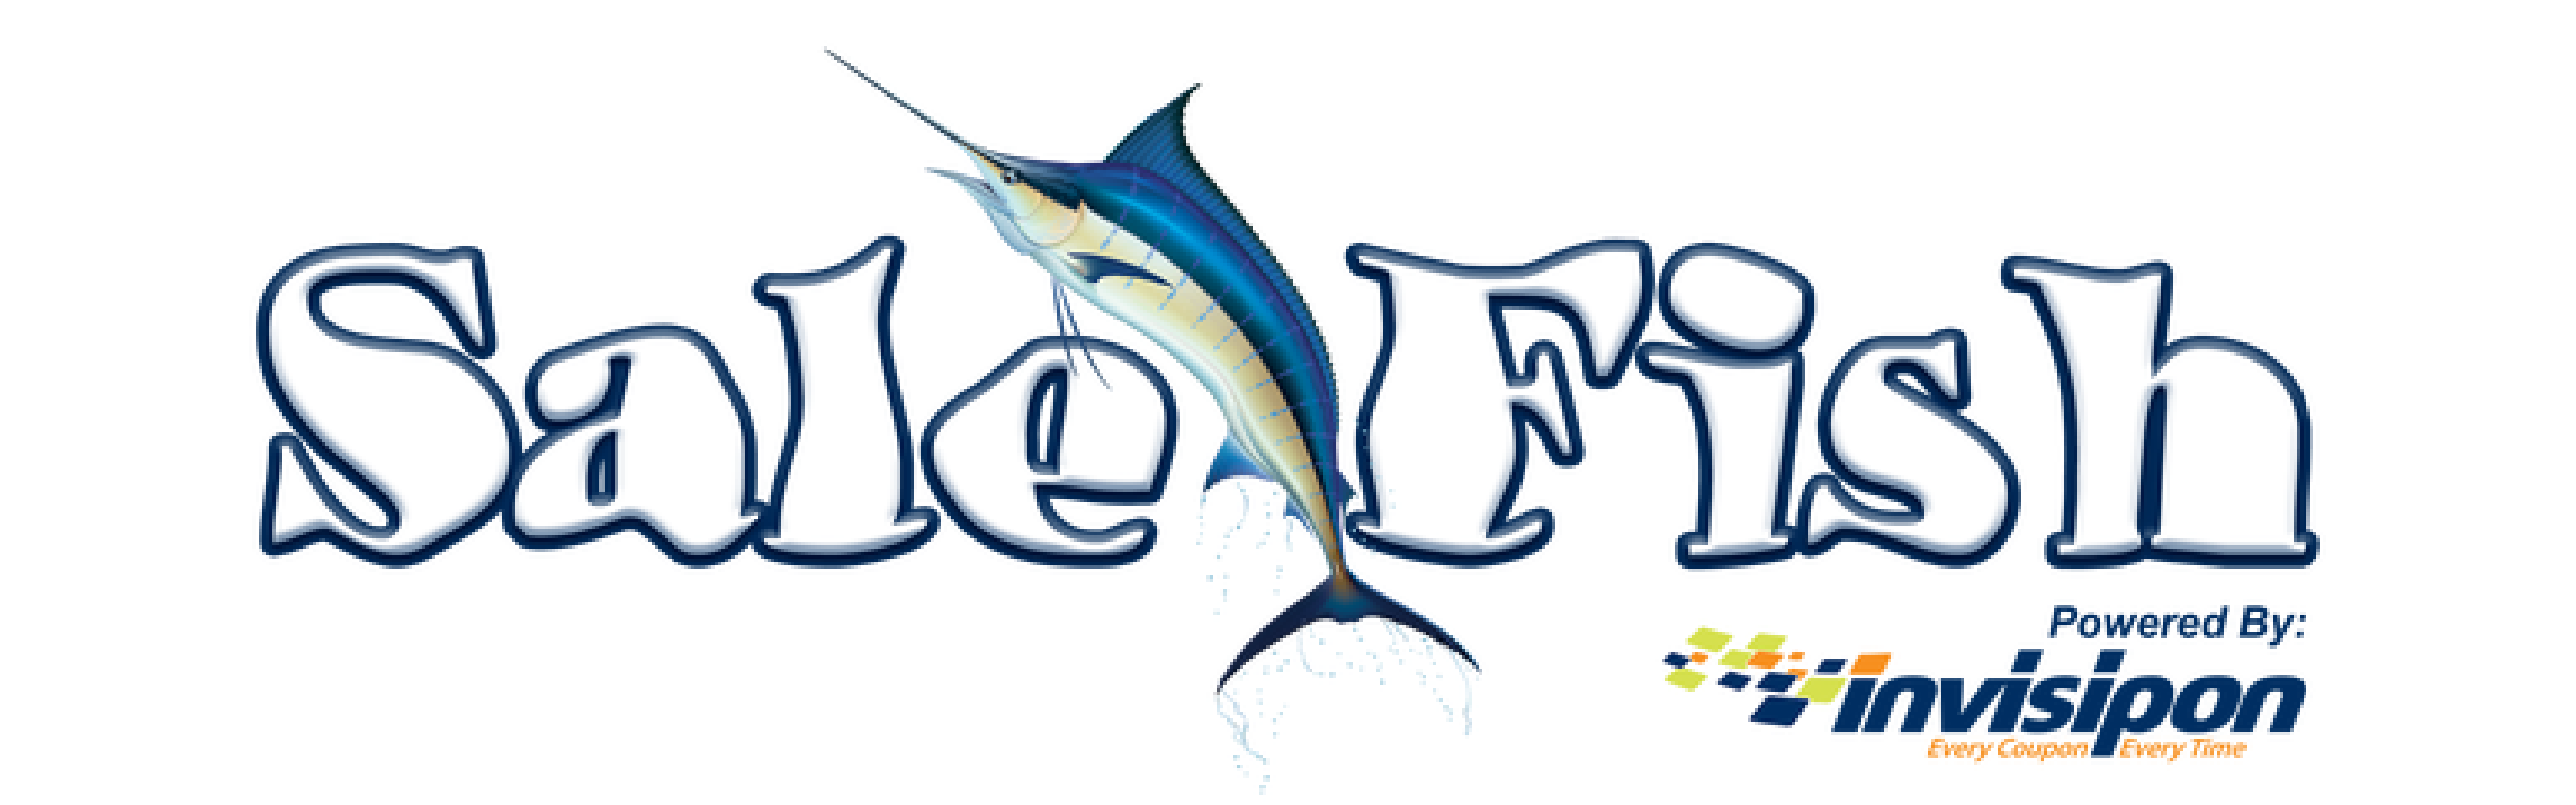 sale-fish-logo-full-size-powered-by